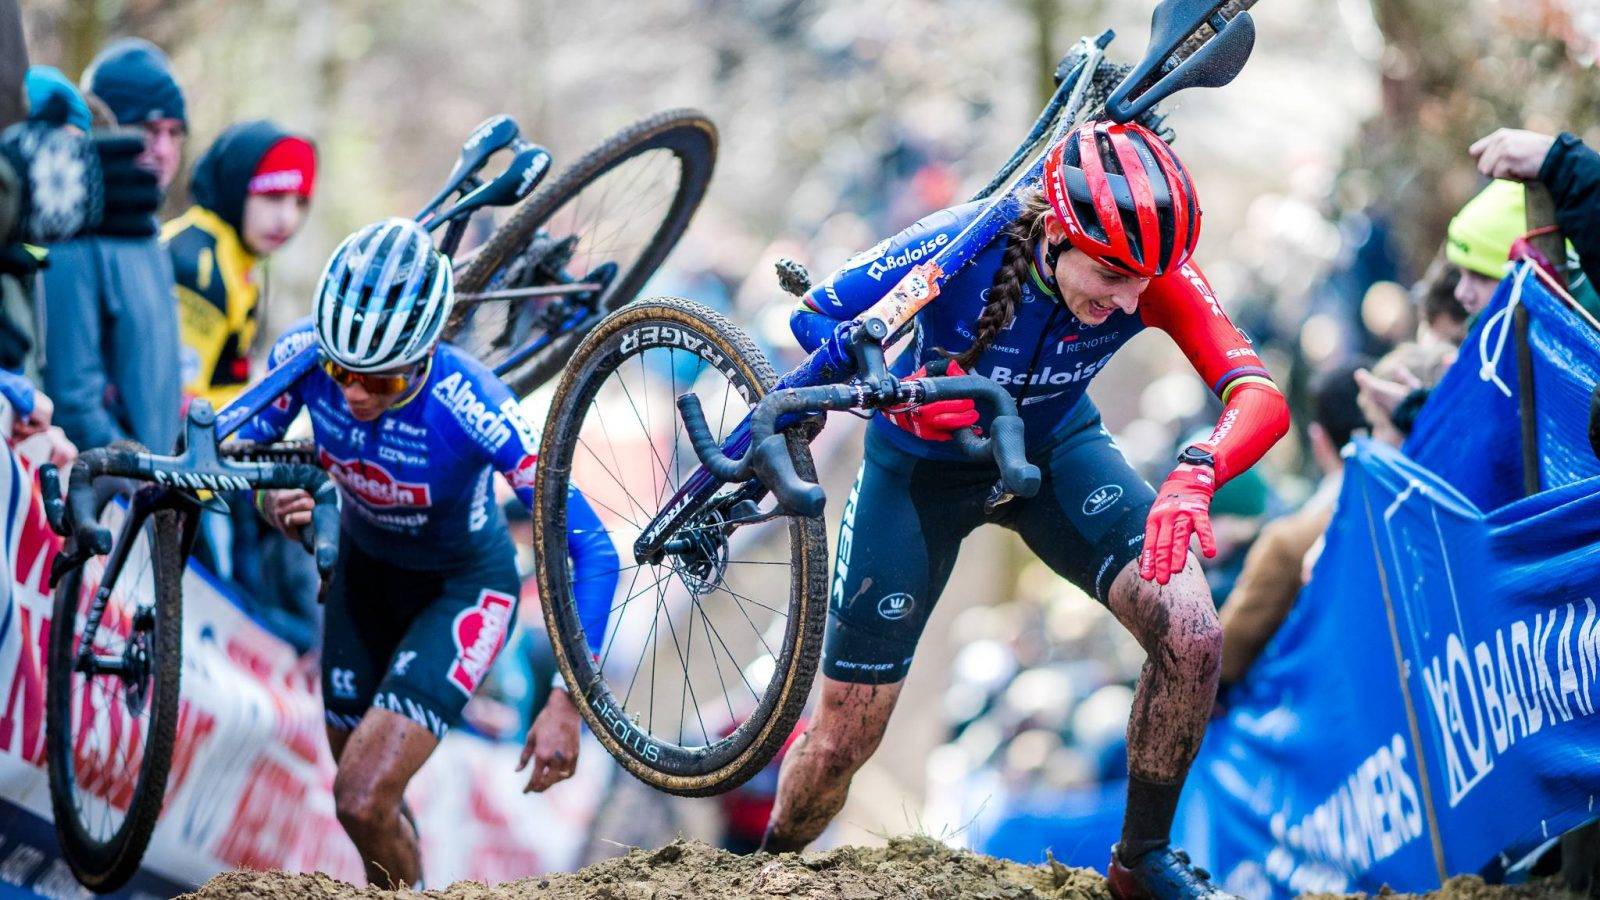 Dutch Lucinda Brand pictured in action during the women's elite race at the 'Herentals Crosst' cyclocross cycling event on Tuesday 03 January 2023 in Herentals, the fourth stage in the X2O Badkamers 'Trofee Veldrijden' competition. BELGA PHOTO JASPER JACOBS